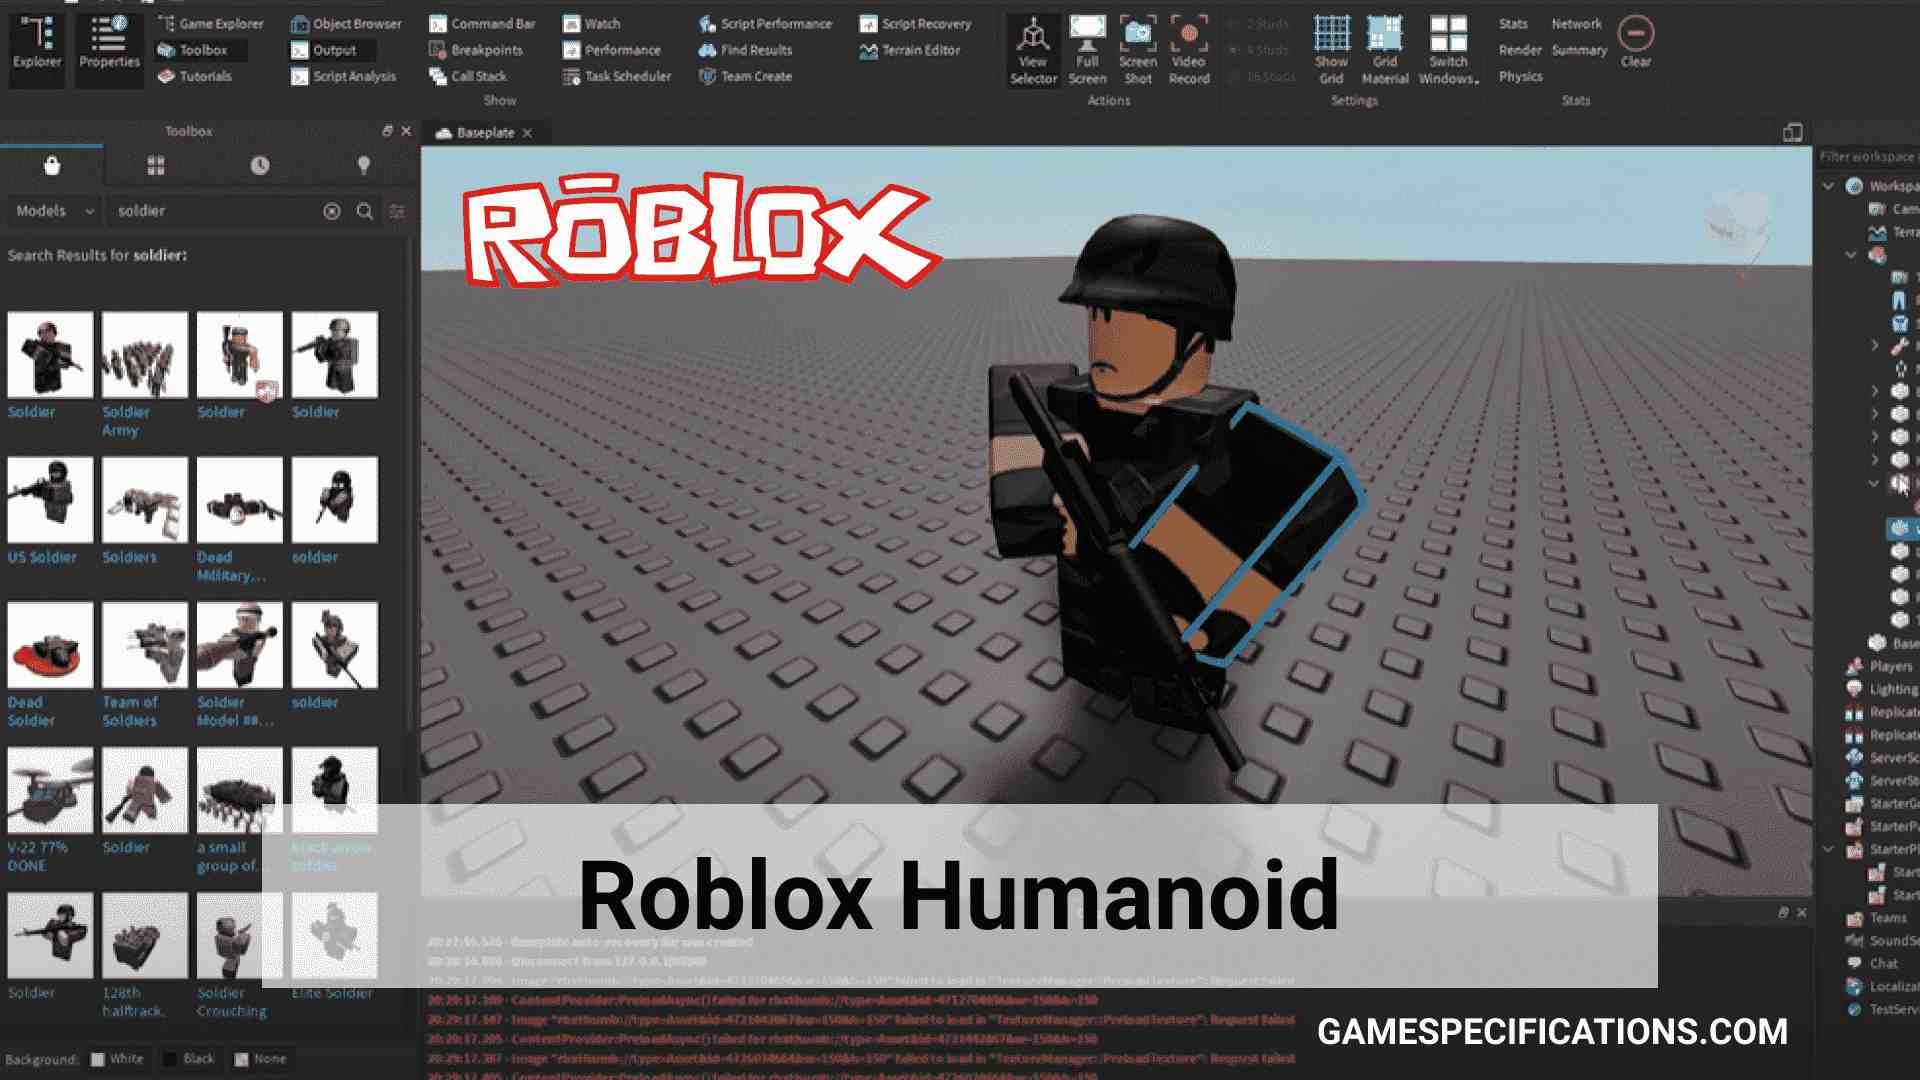 Roblox Humanoid Complete Guide On Humanoid Coding 2021 Game Specifications - roblox get distance camera